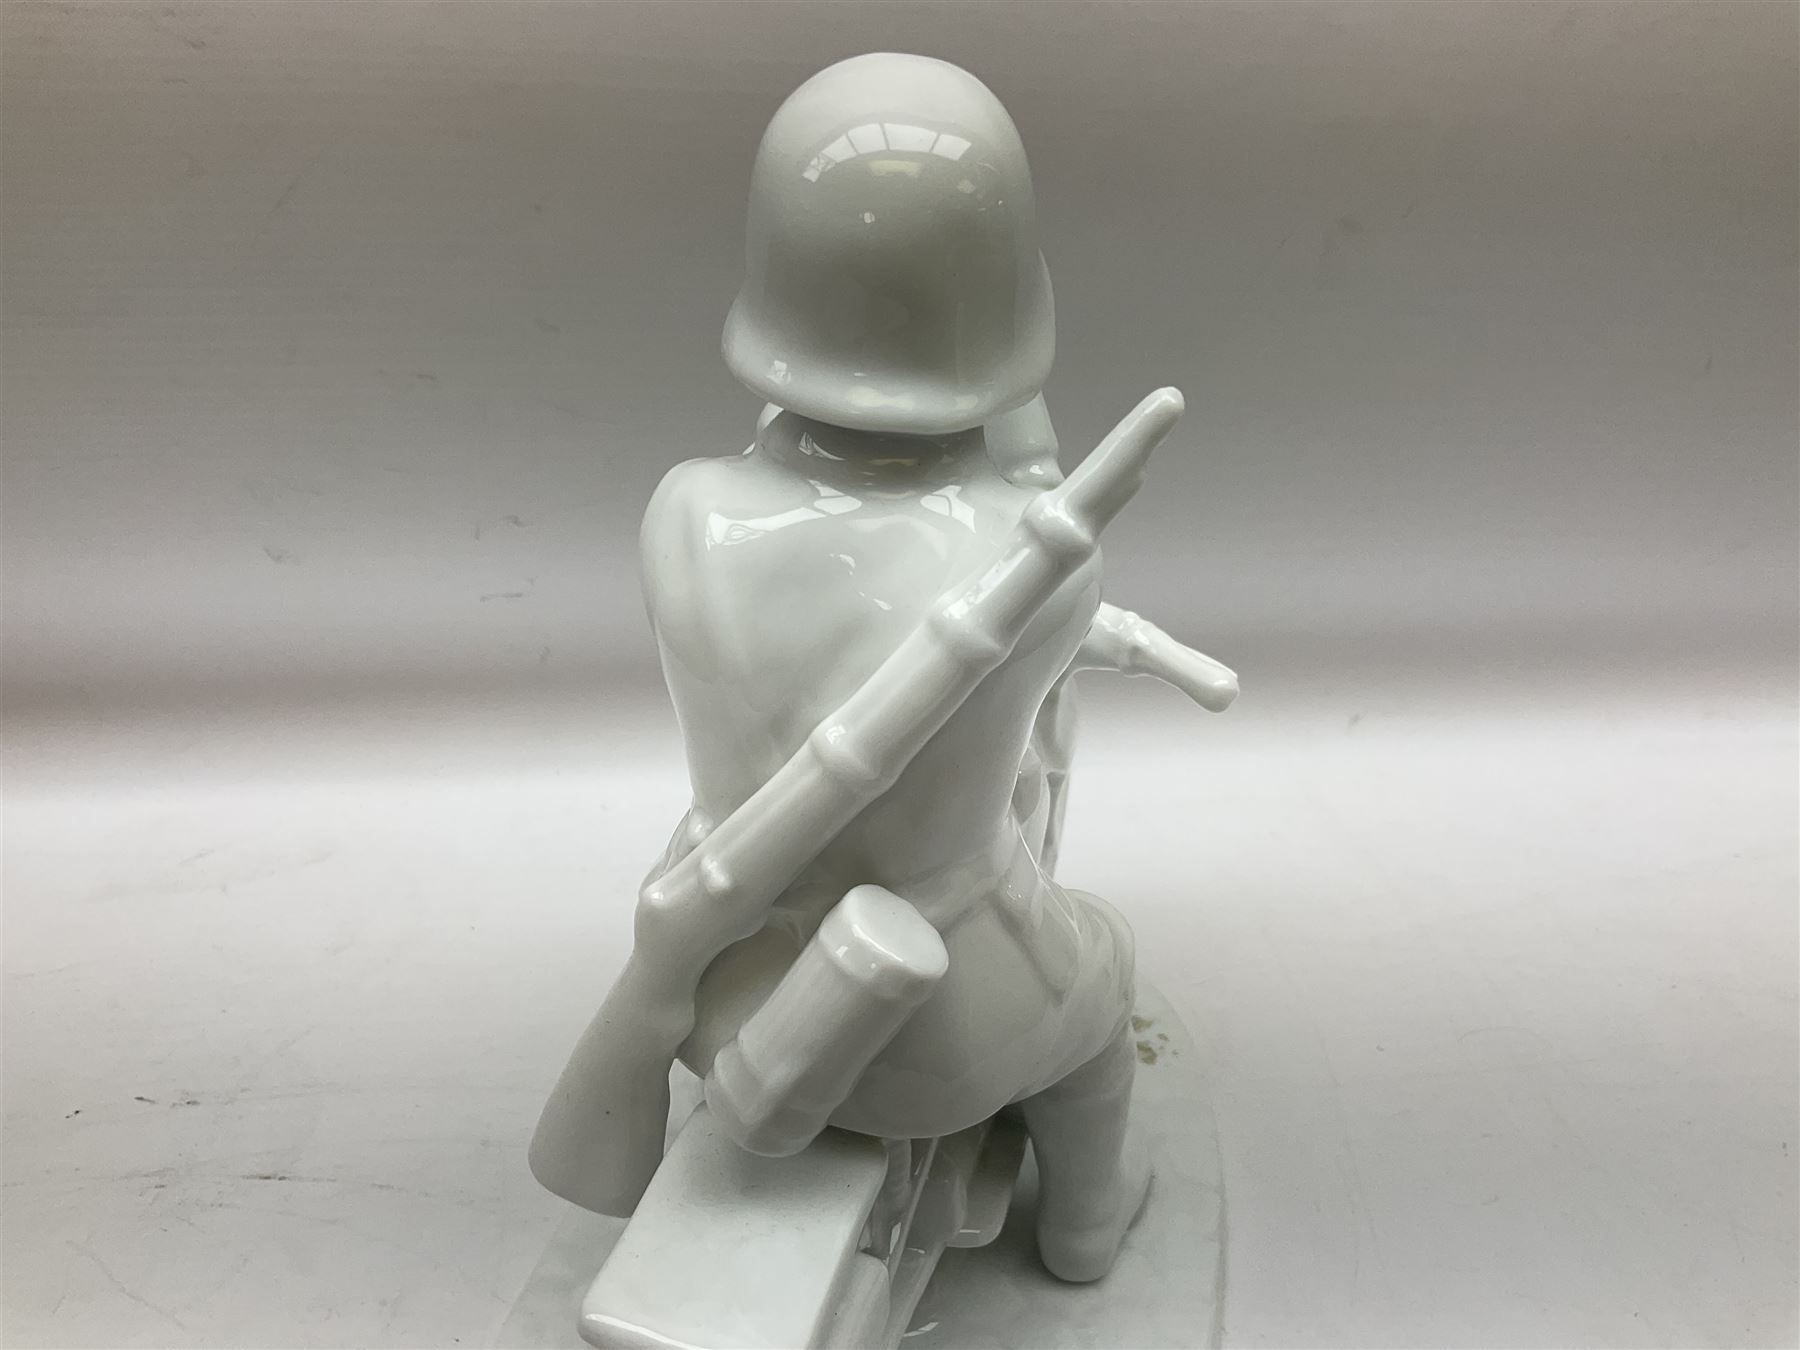 Neundorf figure modelled as a soldier seated upon a stationary motorcycle looking through binoculars - Image 2 of 8